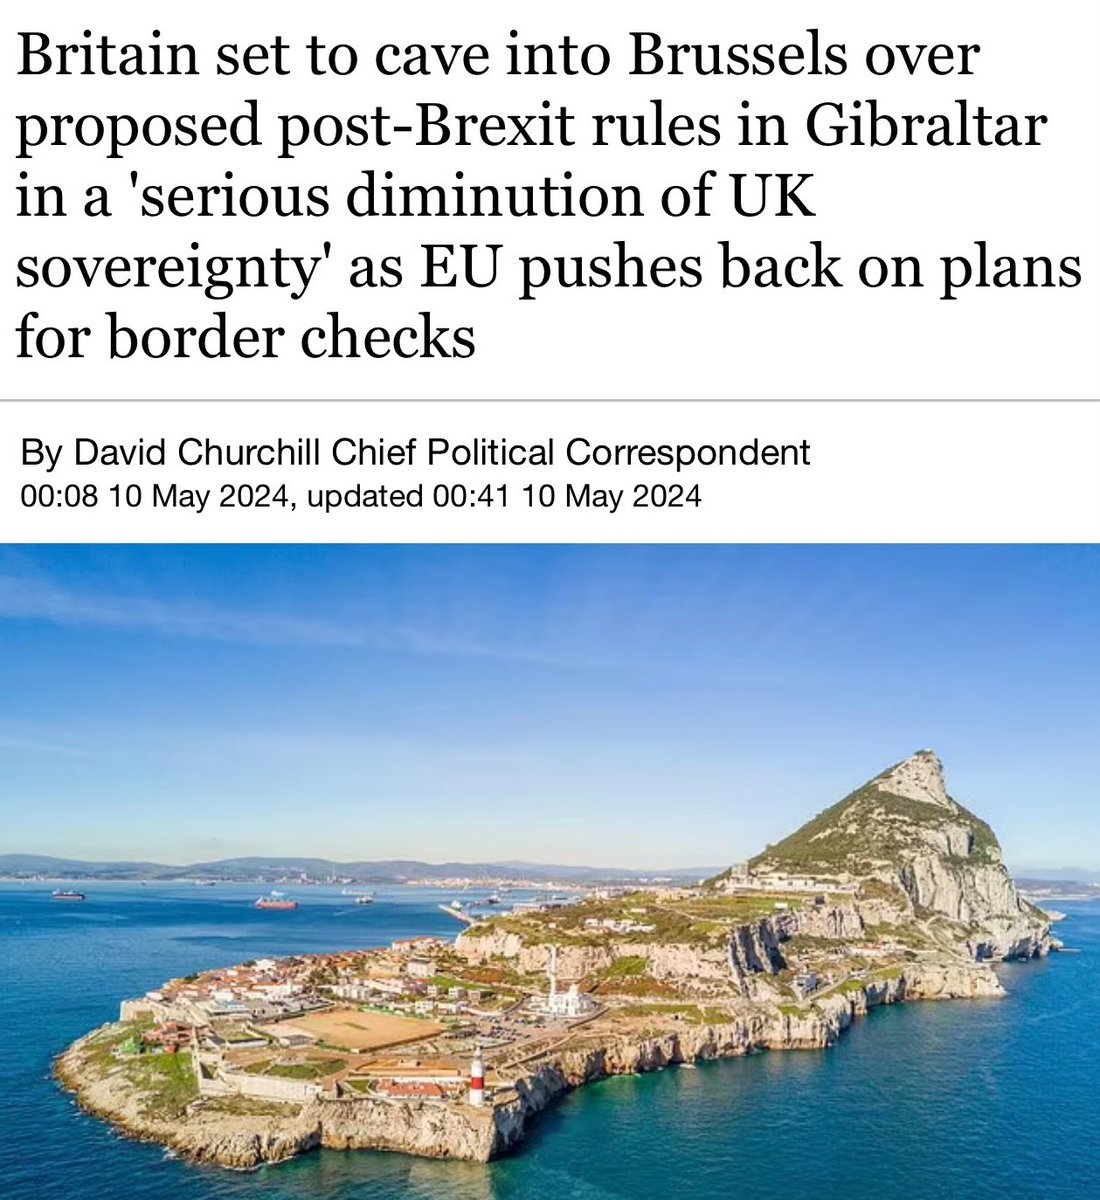 Gibraltar voted by over 90% to remain. Maybe they’re taking their sovereignty back. From the UK.